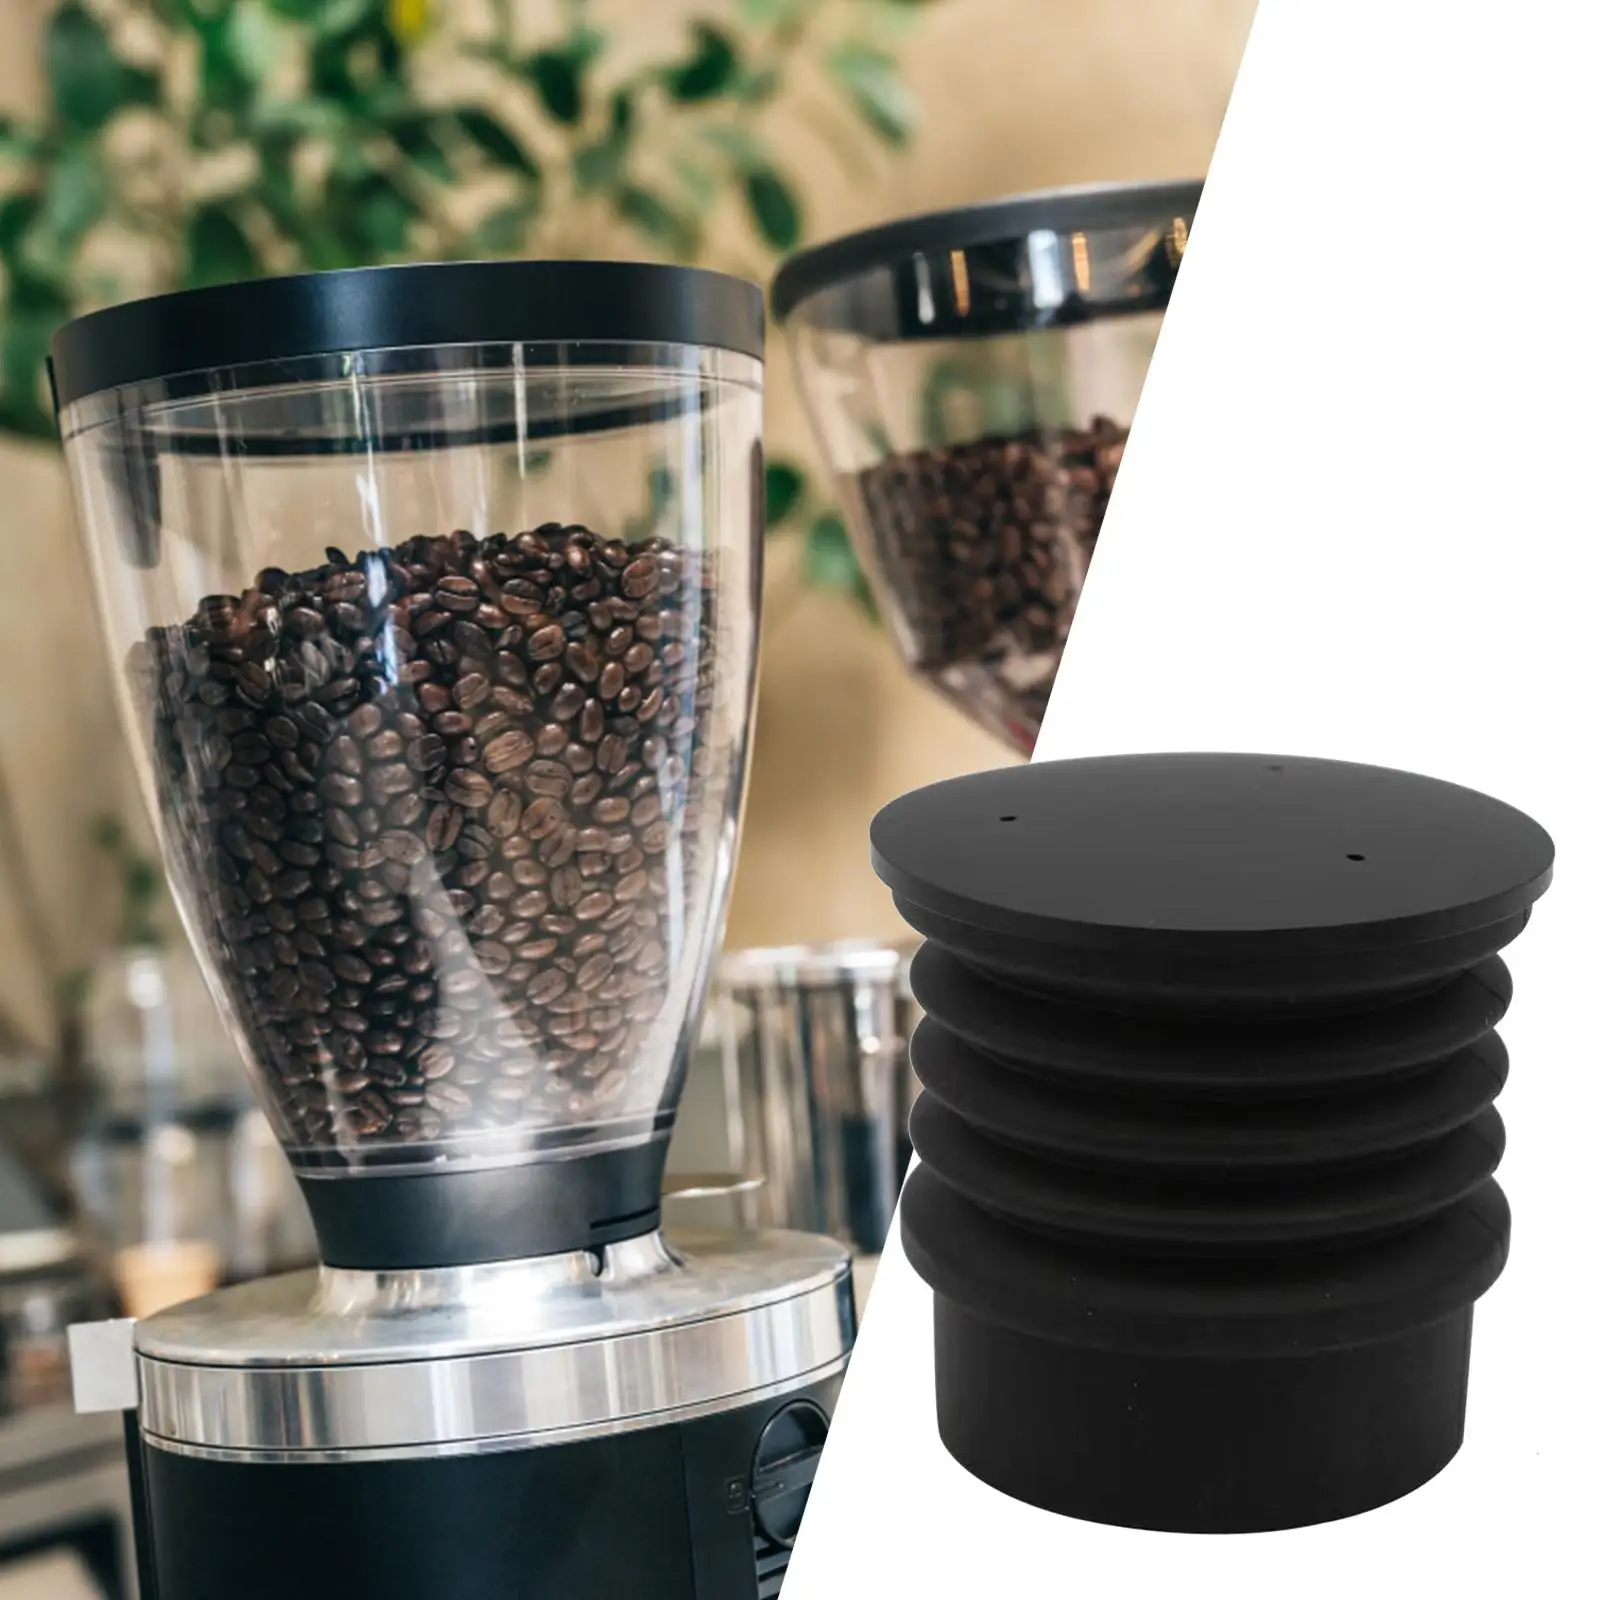 Grinder Blowing Bean Bins Coffee Grinder Cleaning Tool Coffee Beans Grinder Single Coffee Machine Accessory Replacement